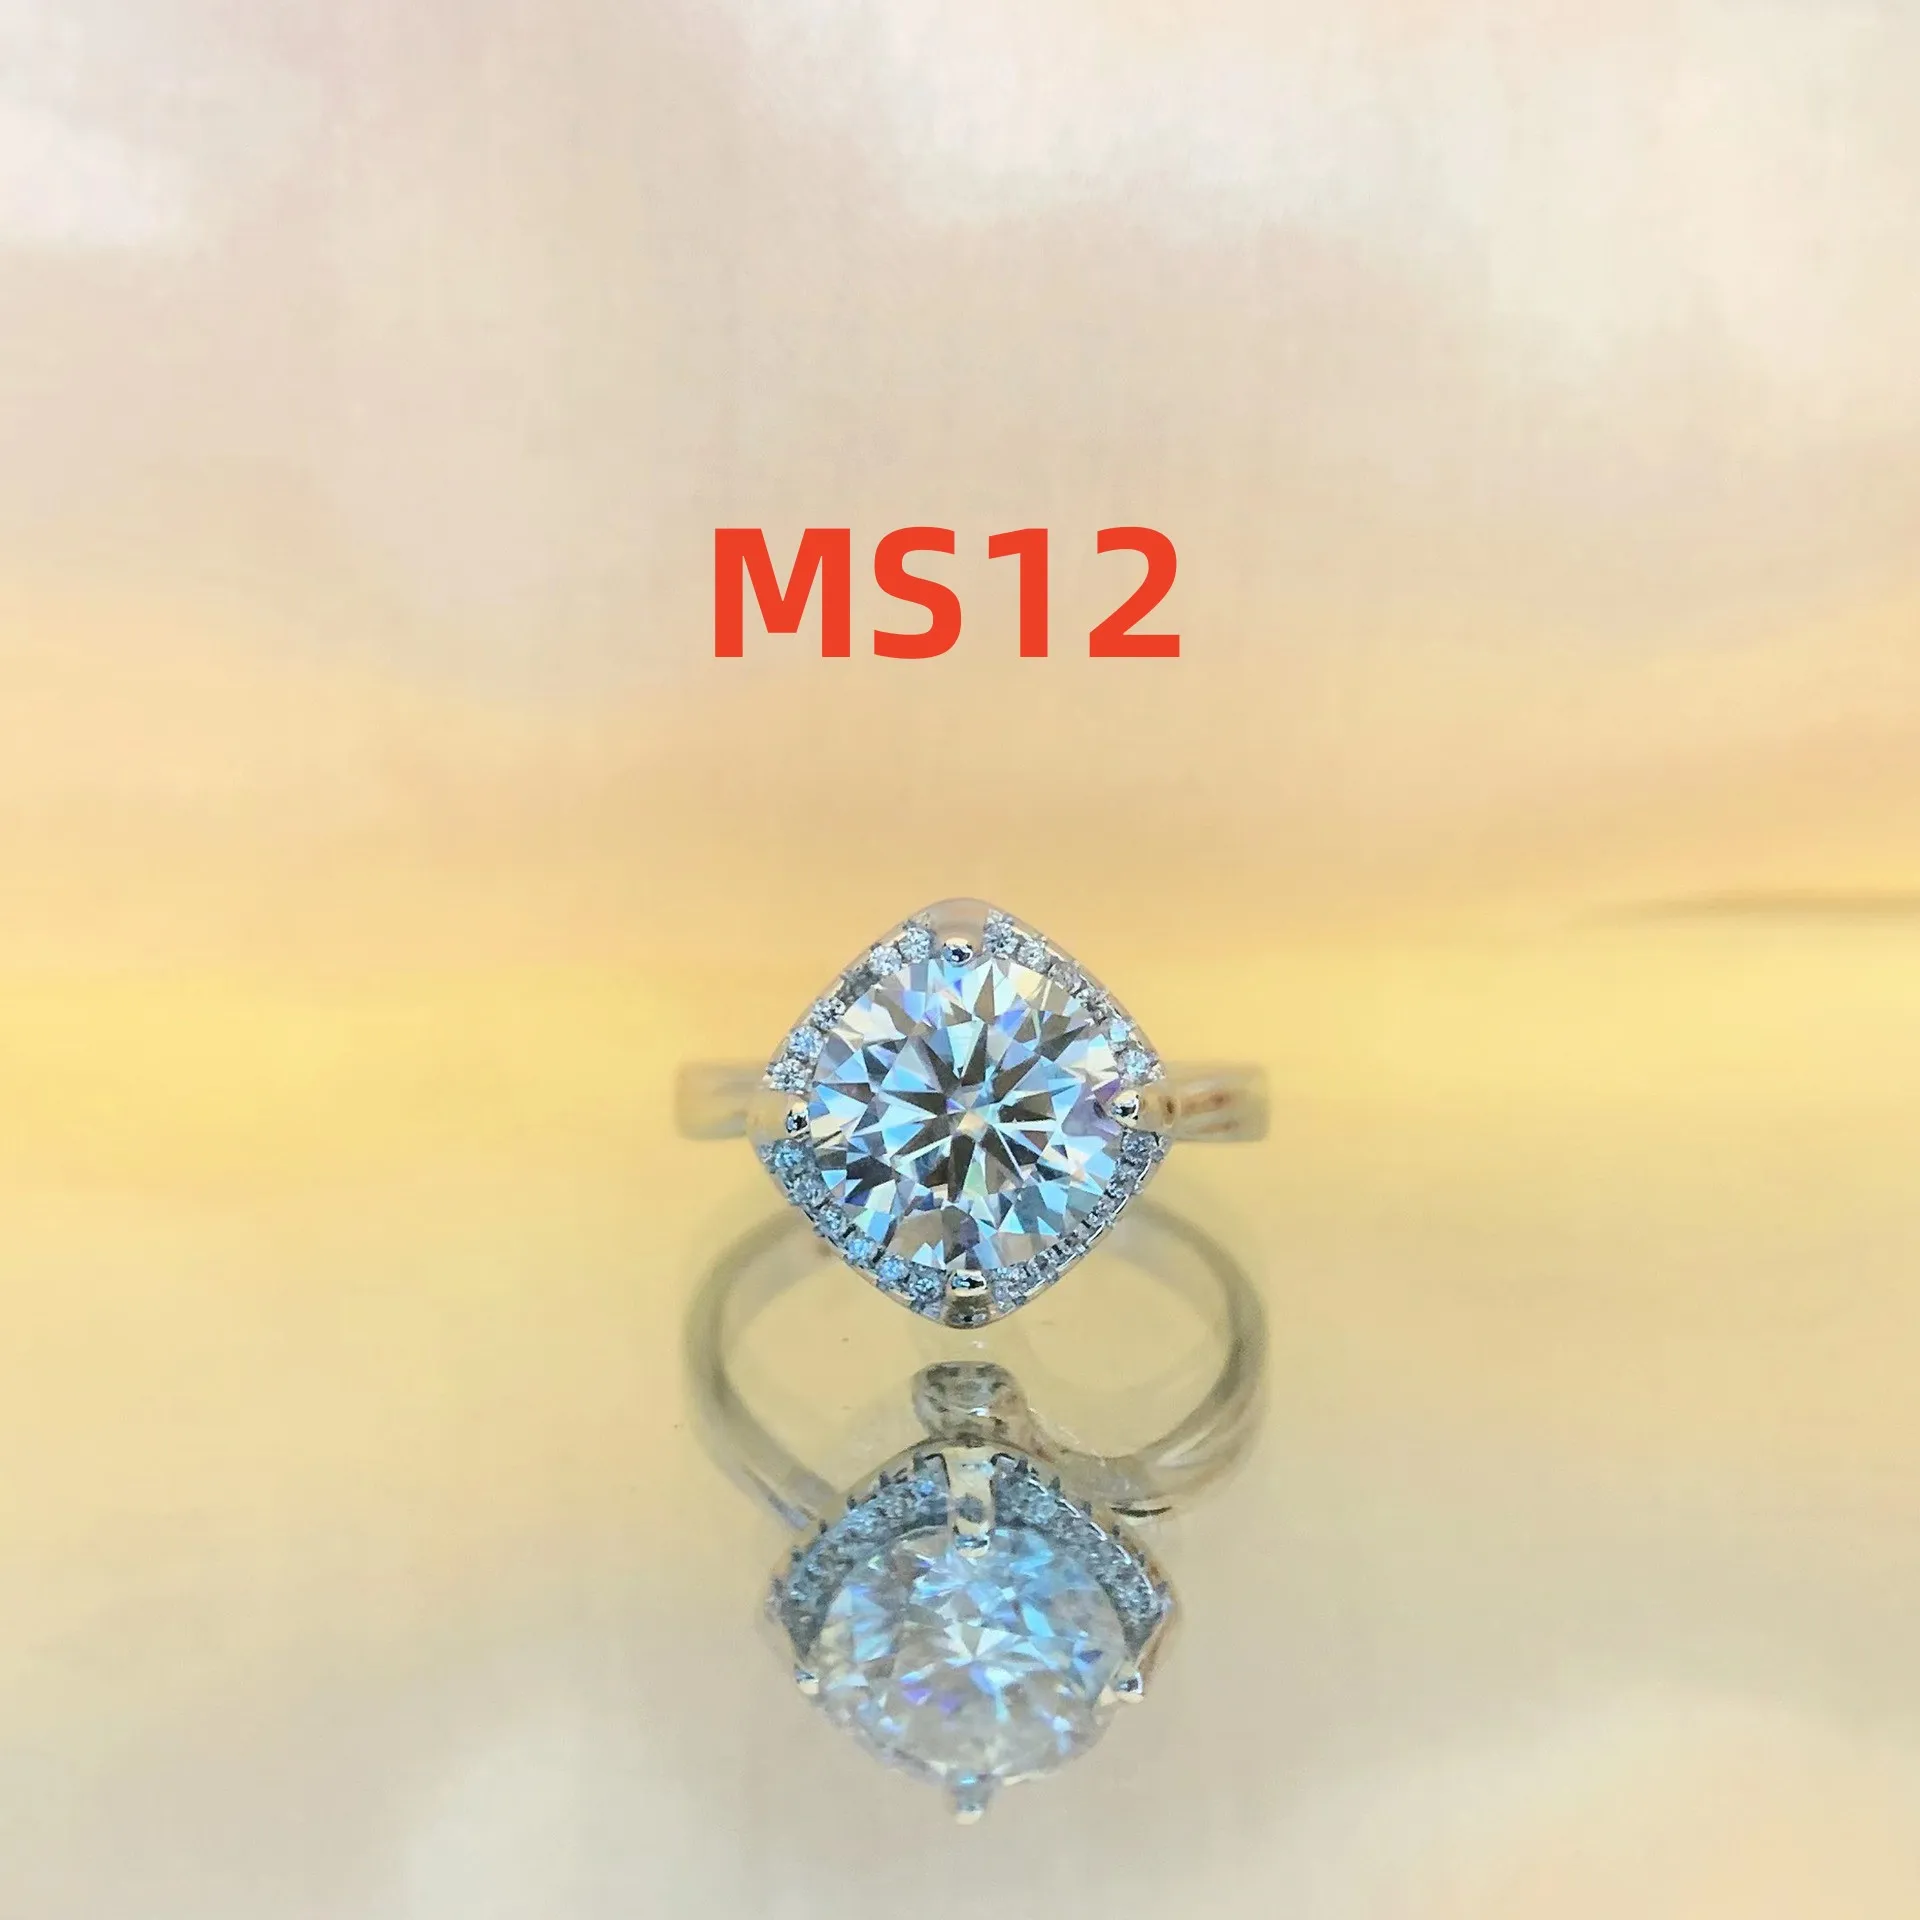 

T40 925 Sterilized silver Mosanite ring delicate absolutely gorgeous